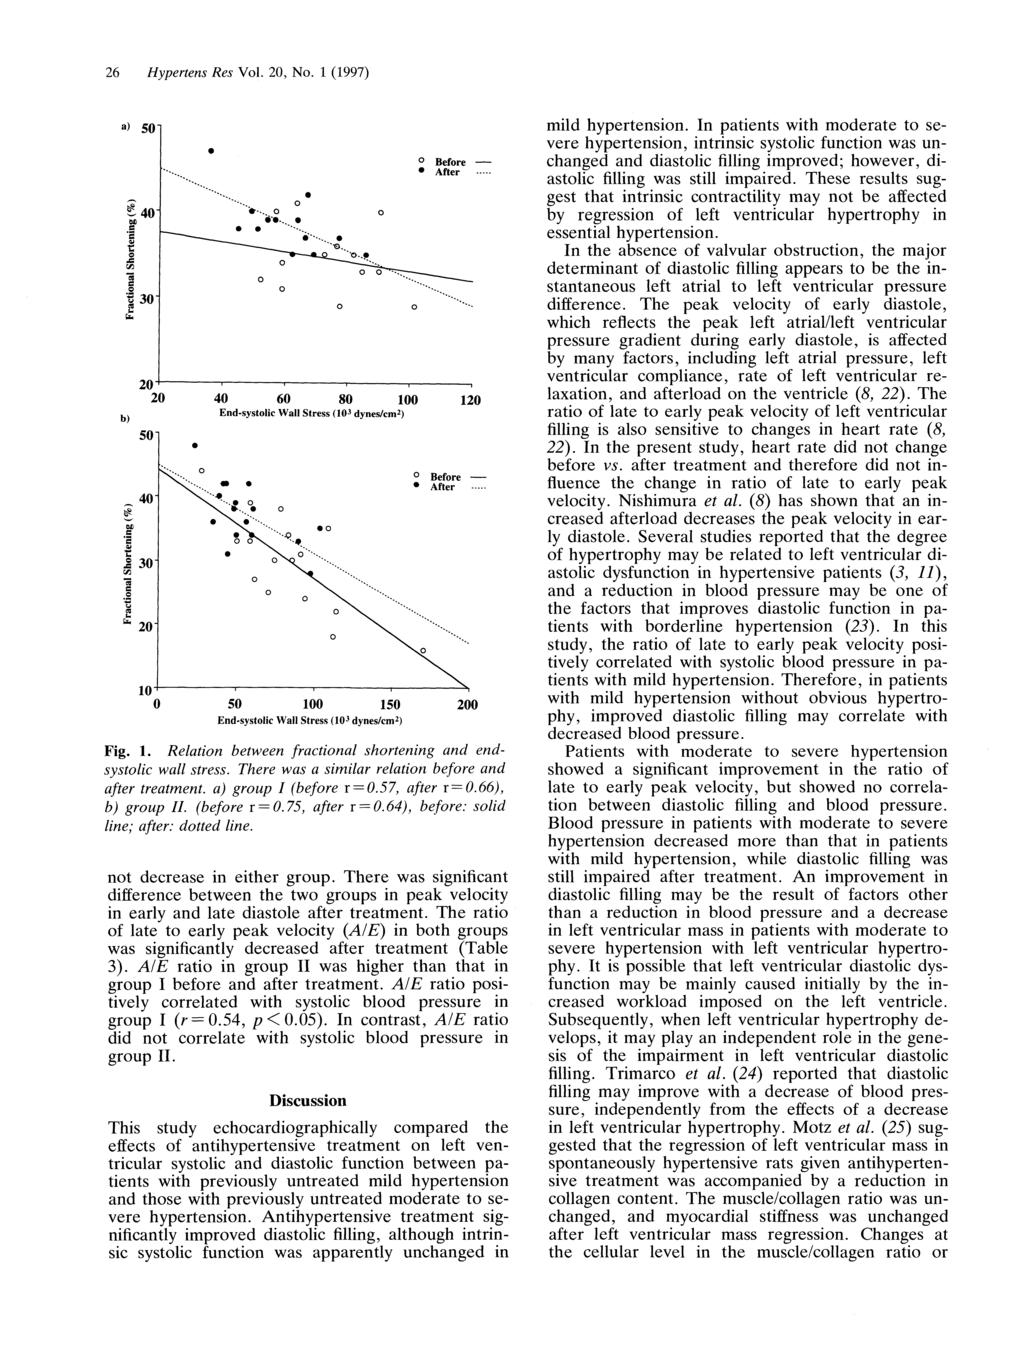 26 Hypertens Res Vol. 20, No. 1(1997) Fig. 1. Relation between fractional shortening and endsystolic wall stress. There was a similar relation before and after treatment. a) group I (before r = 0.